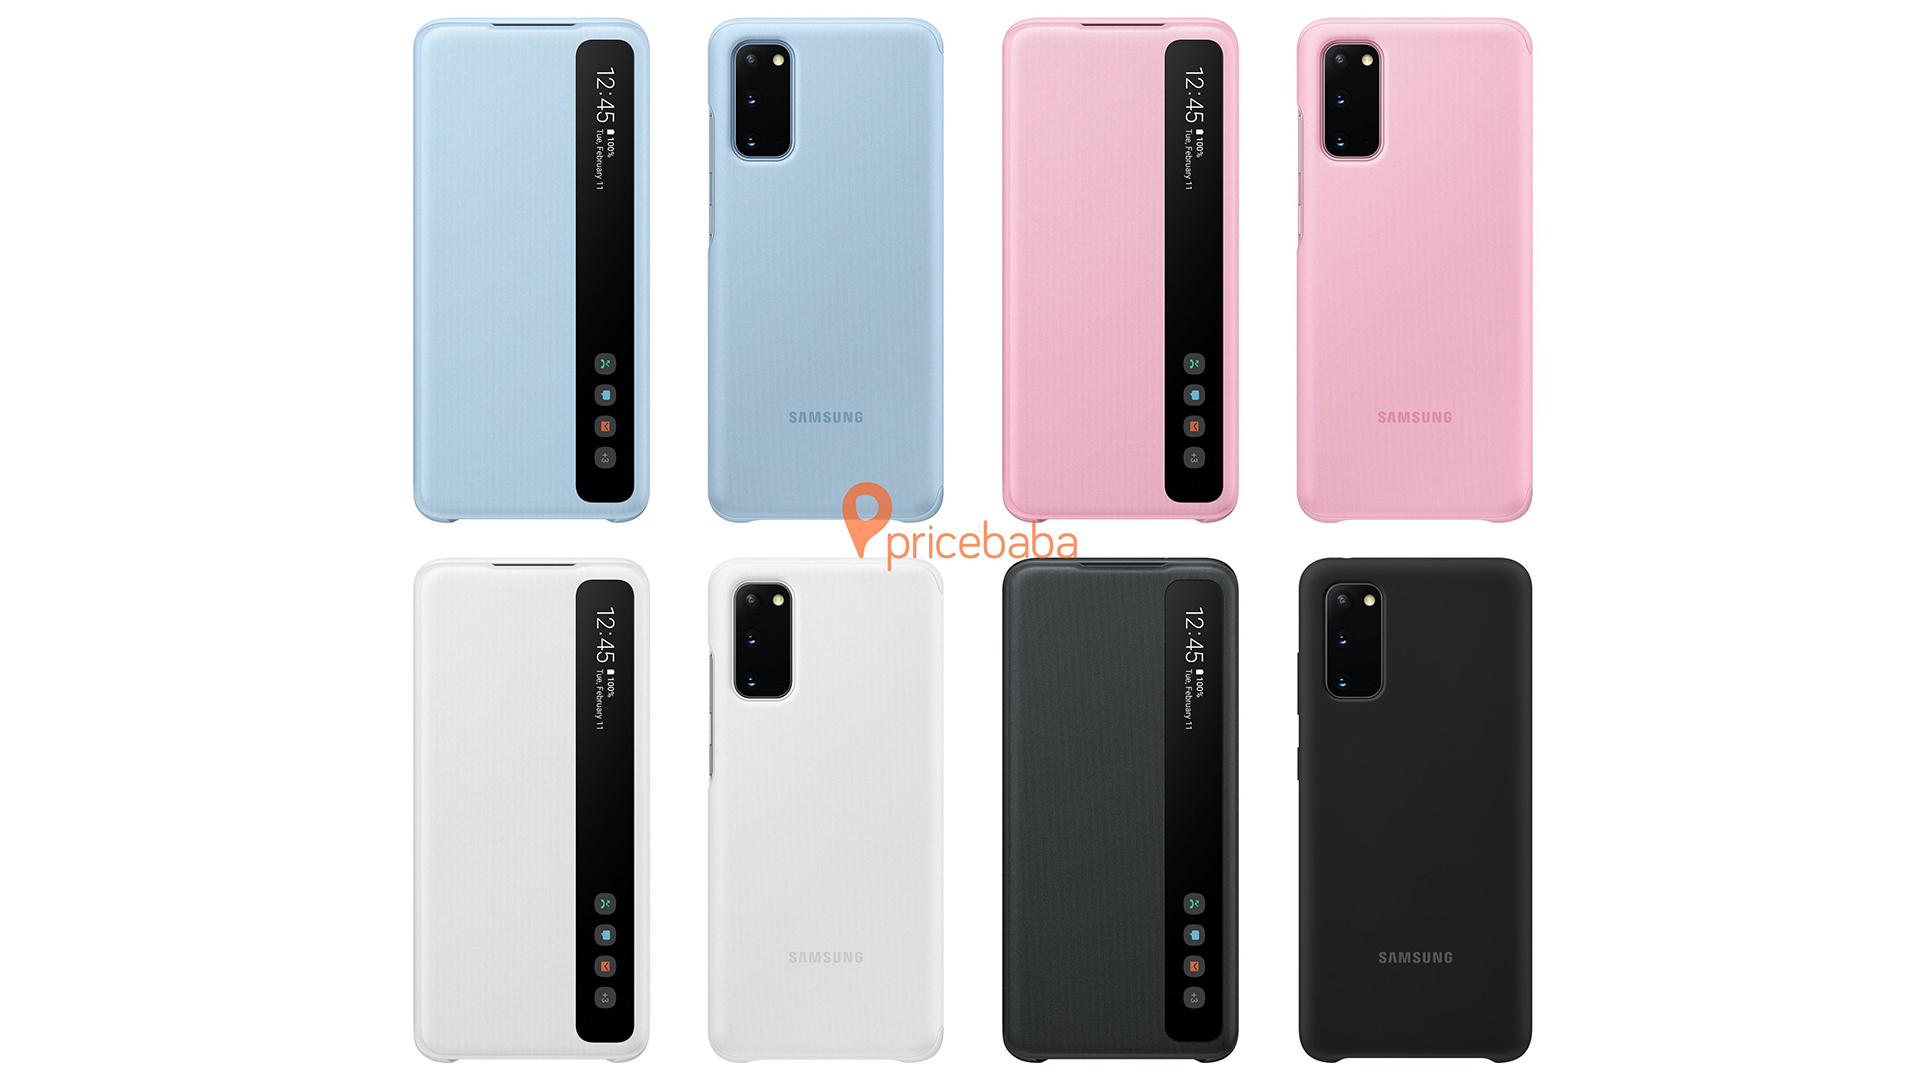 Samsung Galaxy S20 Cases Leaked